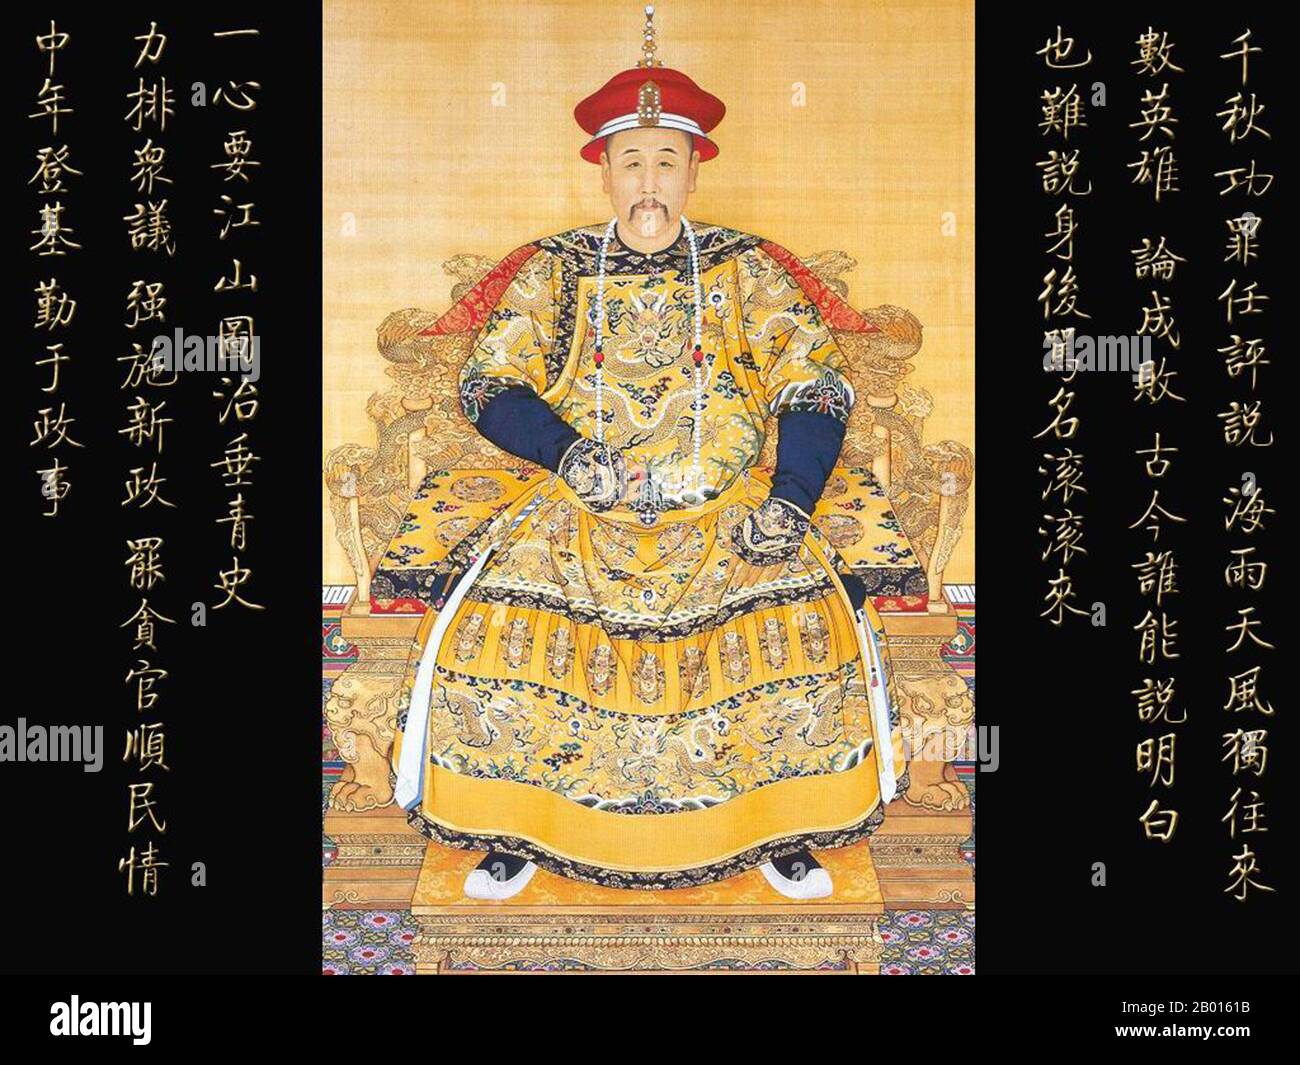 China: Emperor Yongzheng (13 December 1678 – 8 October 1735), 5th ruler of the Qing Dynasty (r. 1722-1735). Hanging scroll painting, 18th century.  The Yongzheng Emperor, born Yinzhen and temple name Shizong, was the fifth emperor of the Qing Dynasty. A hard-working ruler, Yongzheng's main goal was to create an effective government at minimum expense. Like his father, the Kangxi Emperor, Yongzheng used military force in order to preserve the dynasty's position. Suspected by historians to have usurped the throne, his reign was often called despotic, efficient, and vigorous. Stock Photo